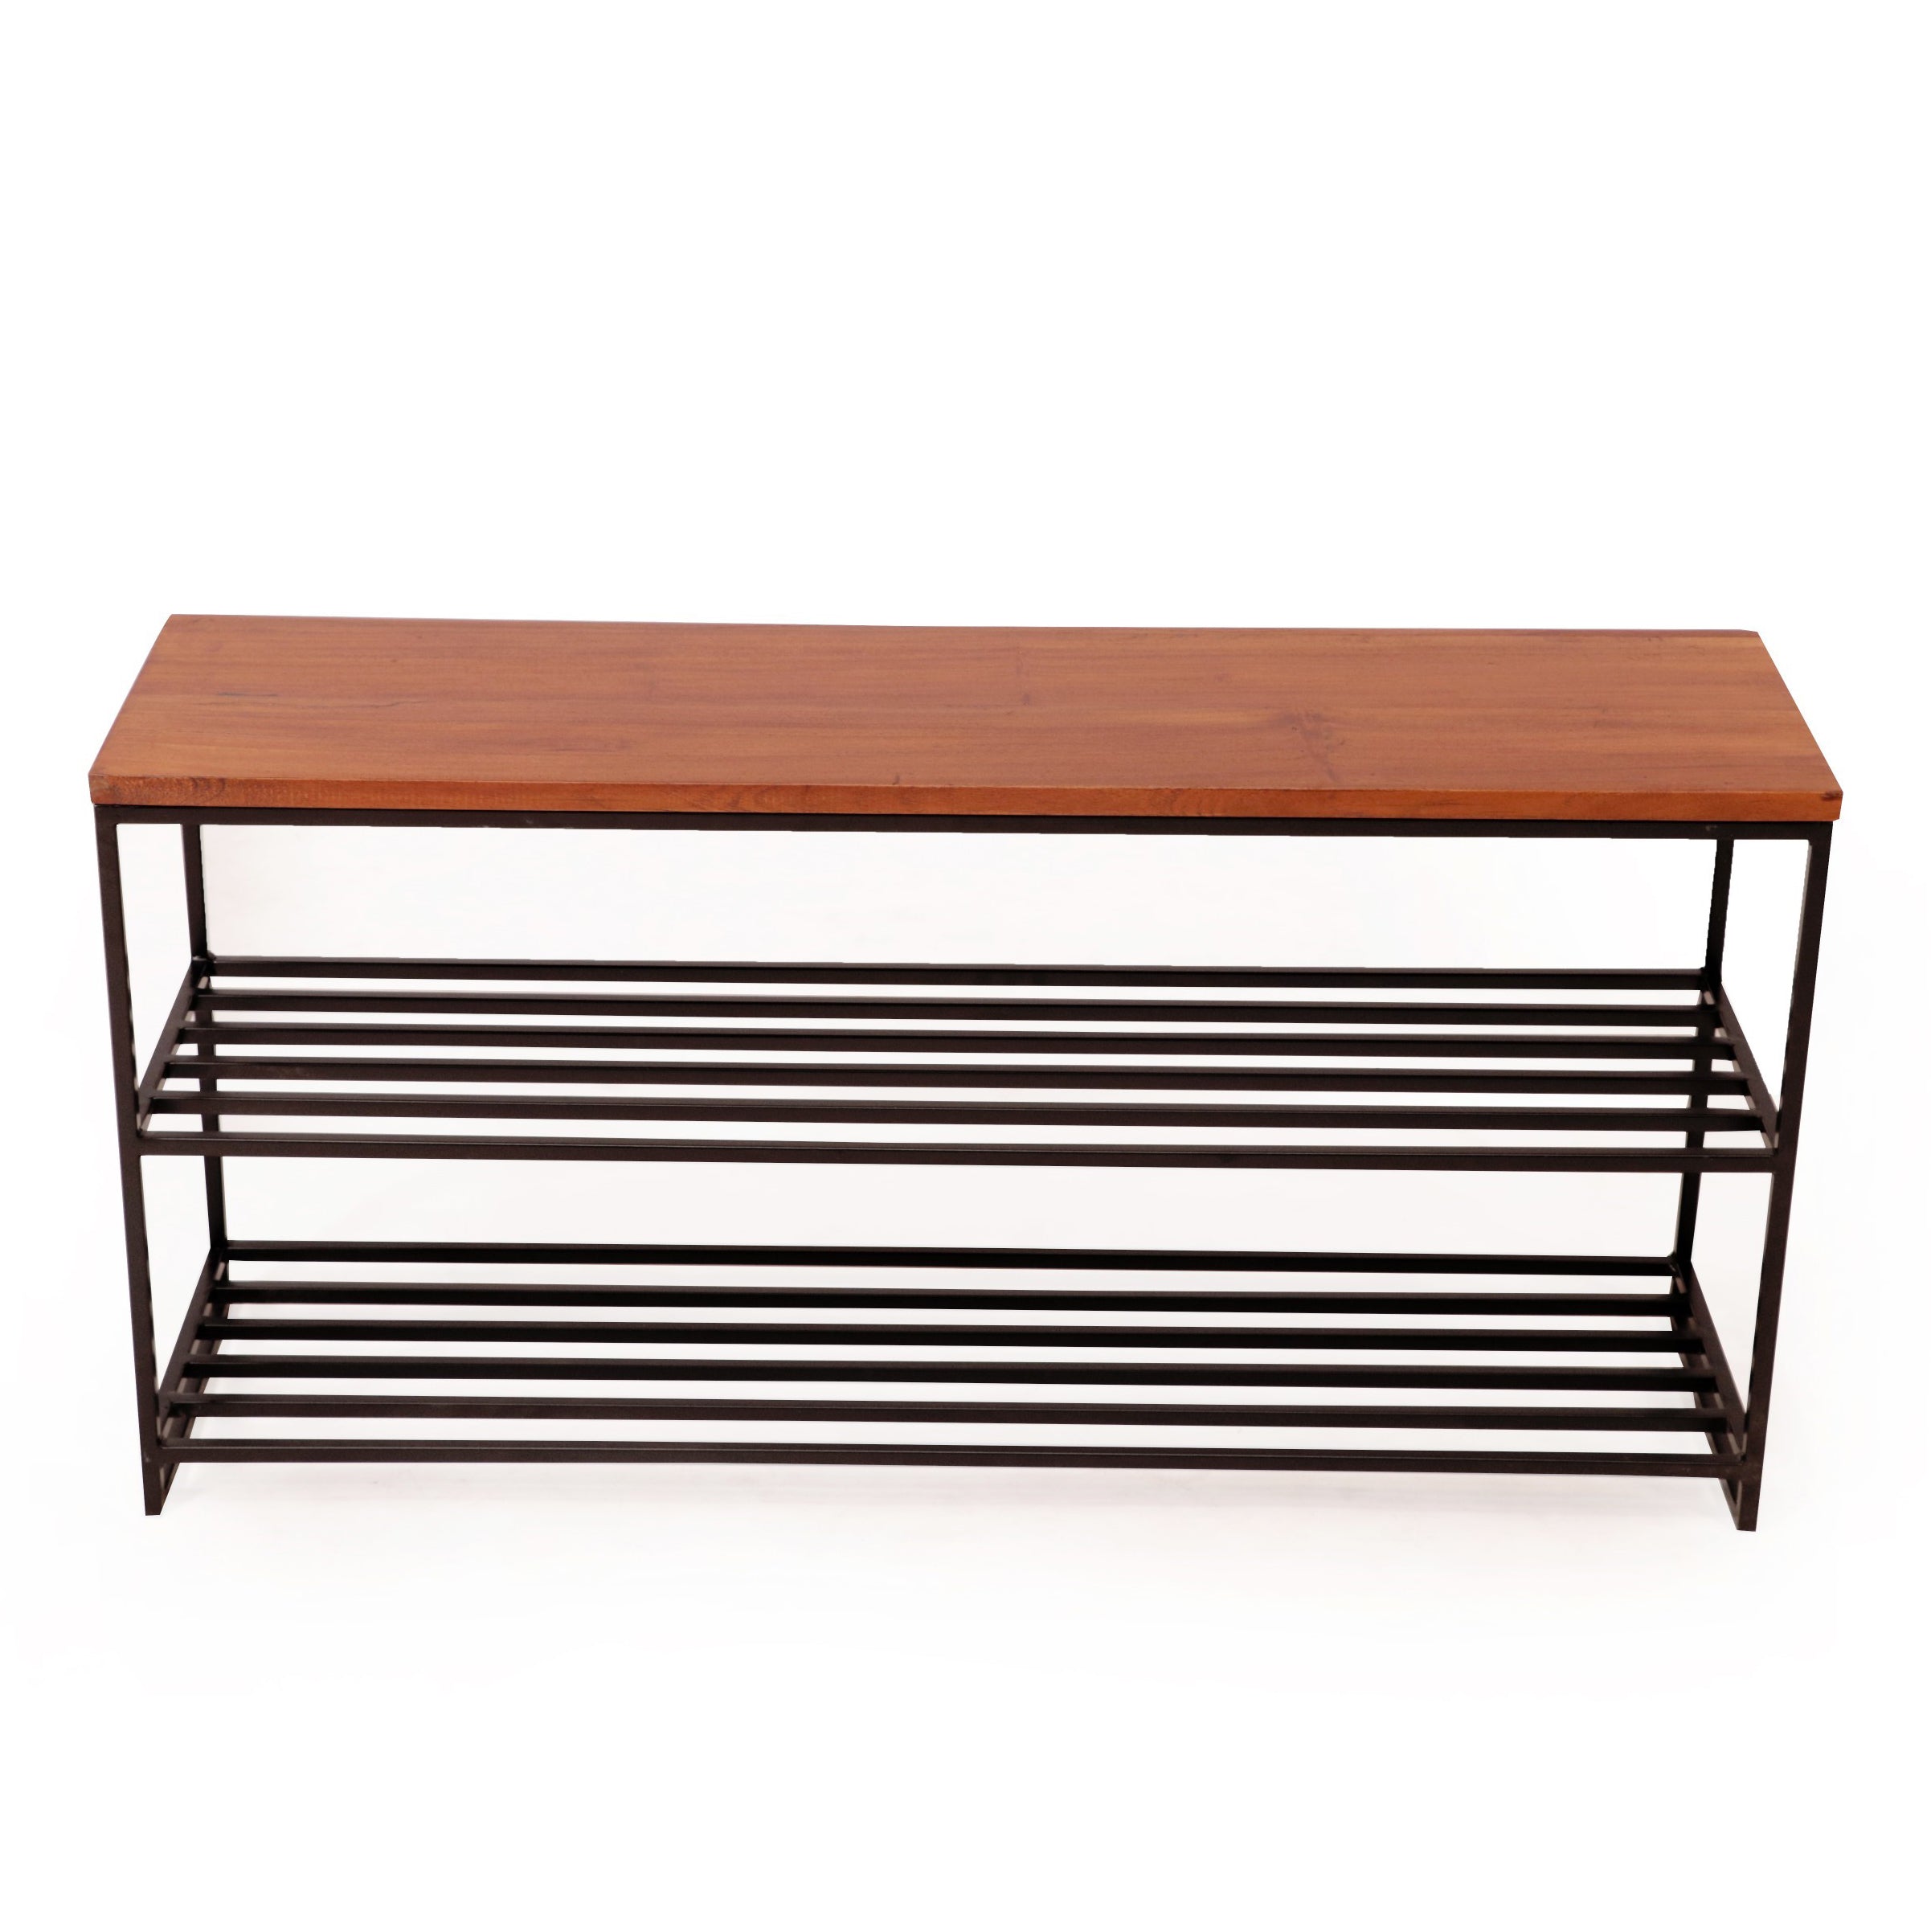 Wide Long Seating Height Open Seating Rack Shoe rack